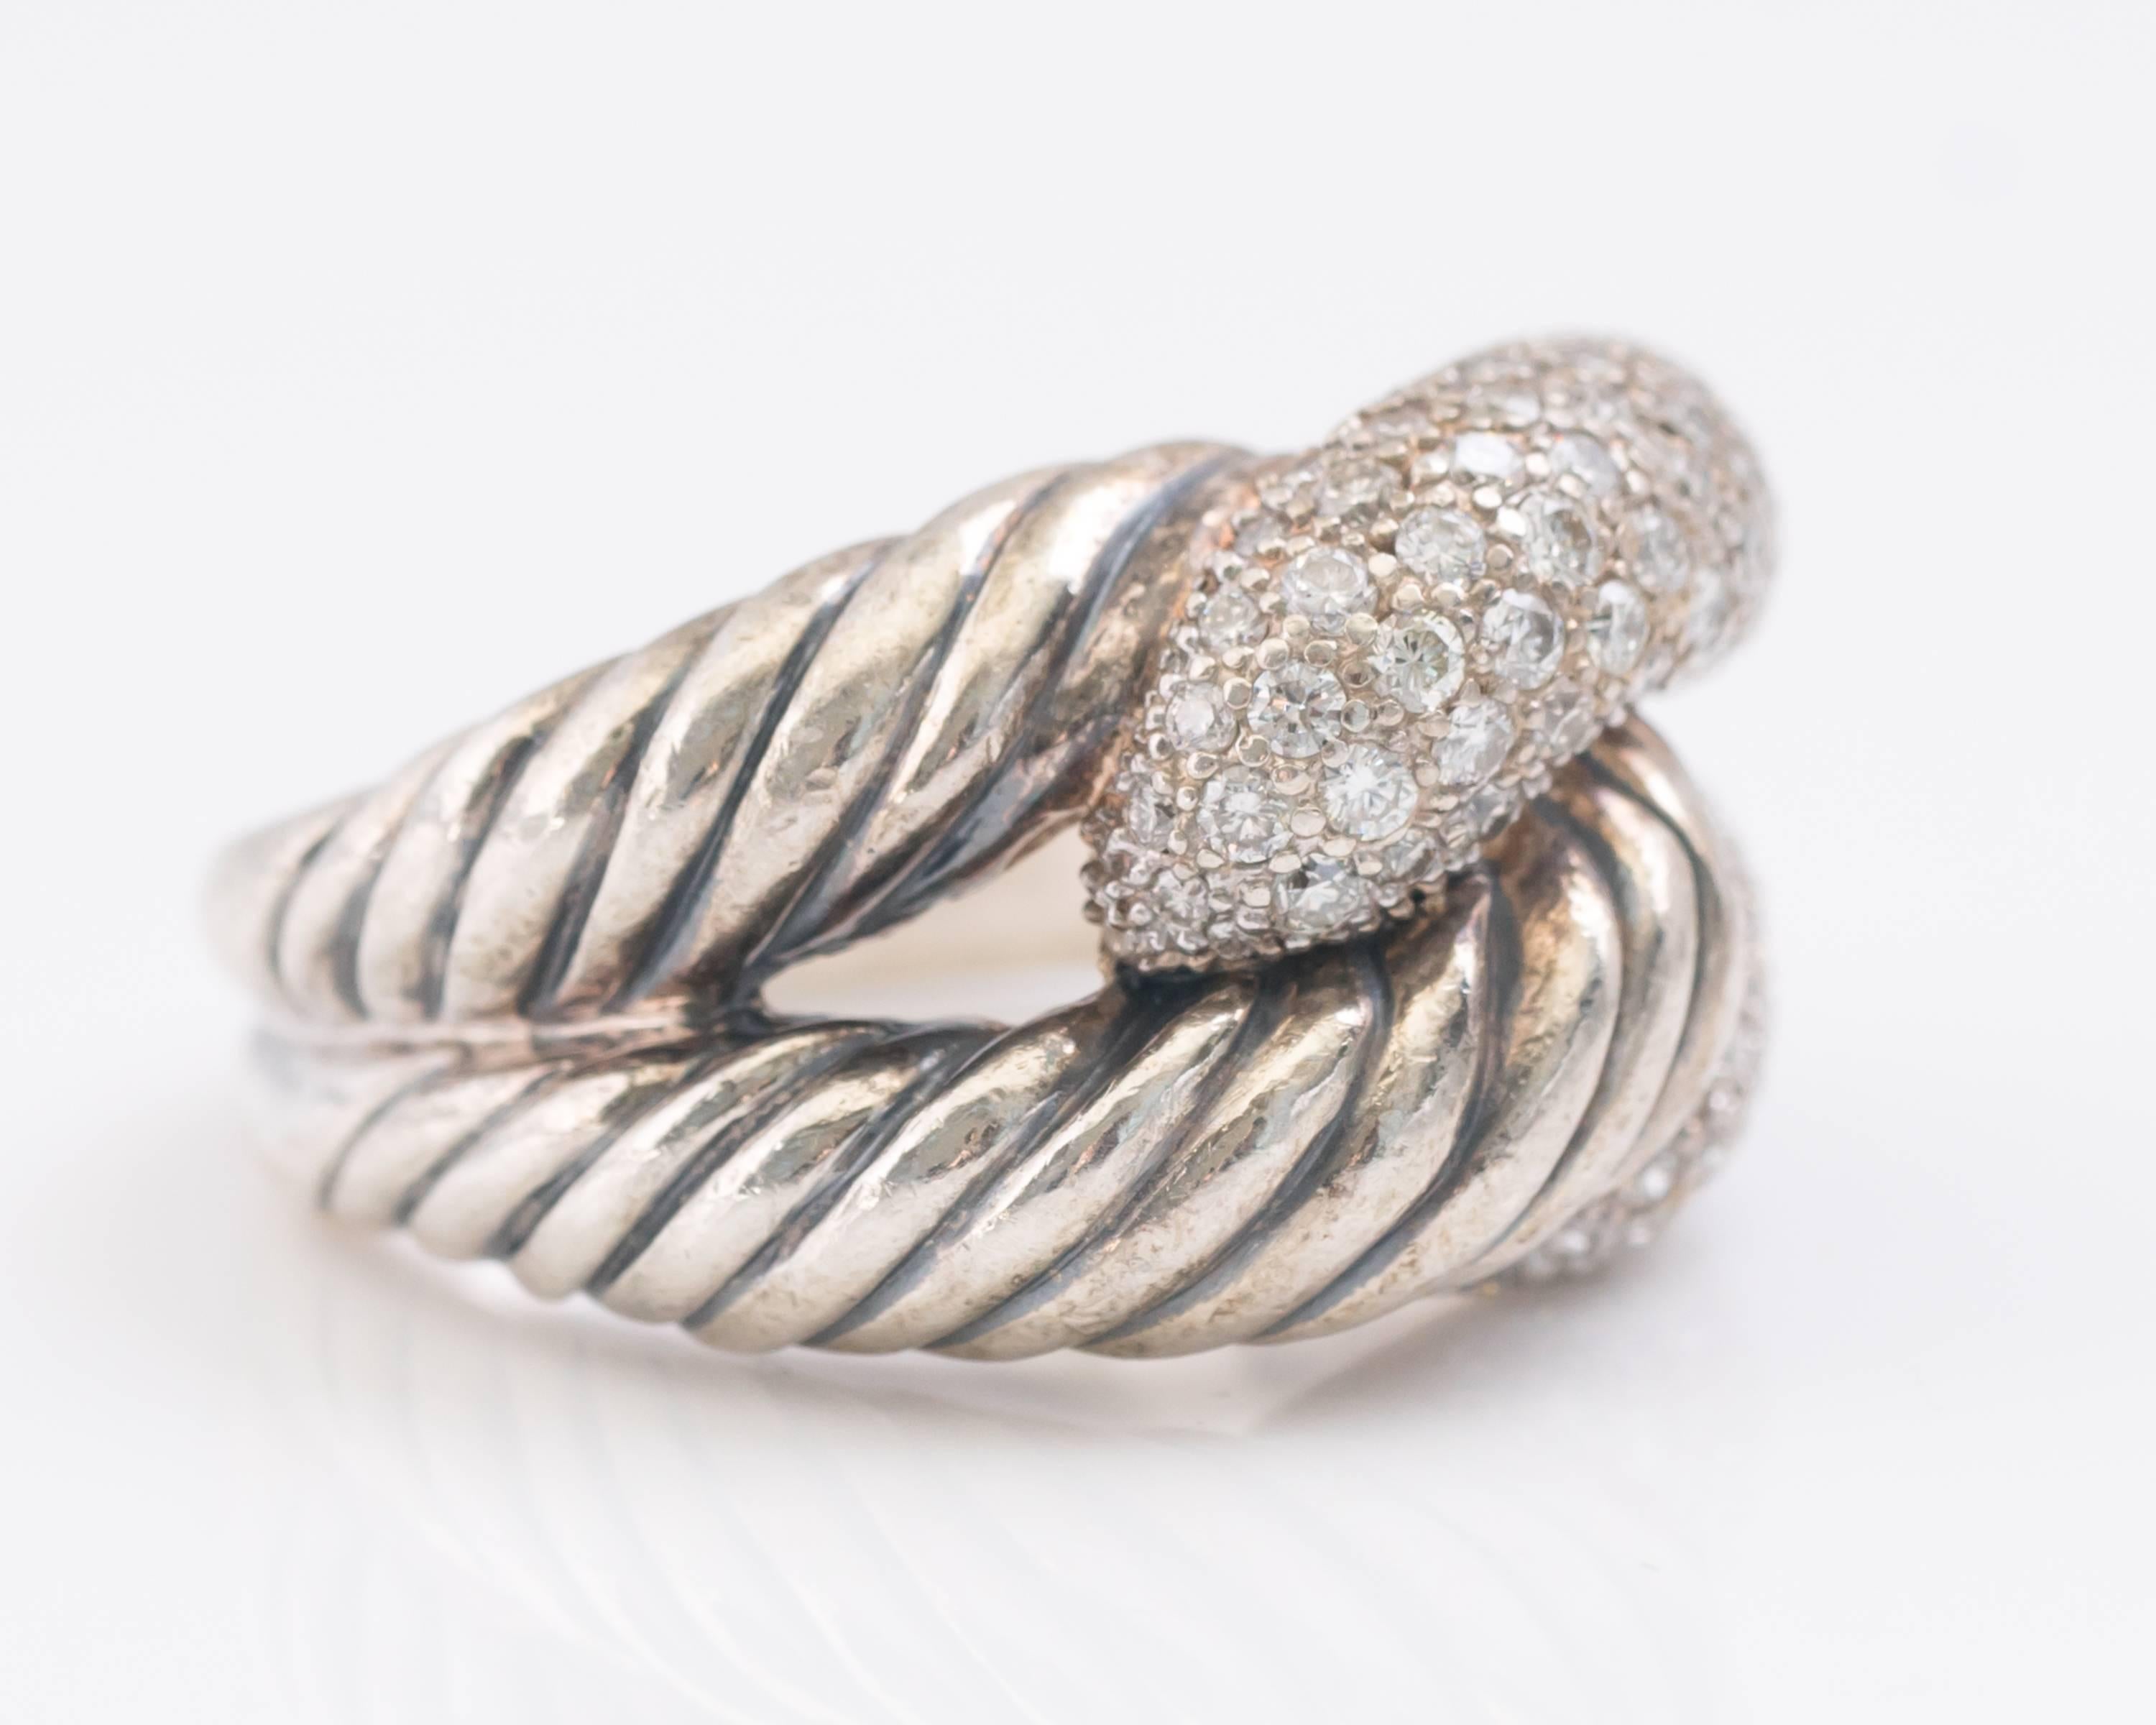 1990s David Yurman Labyrinth Single Loop Ring - Sterling Silver, 1.10 carat total weight Diamonds

Features interlocking links of classic David Yurman cable and pave diamonds. The back half of the ring is smooth and tapers toward the back. The